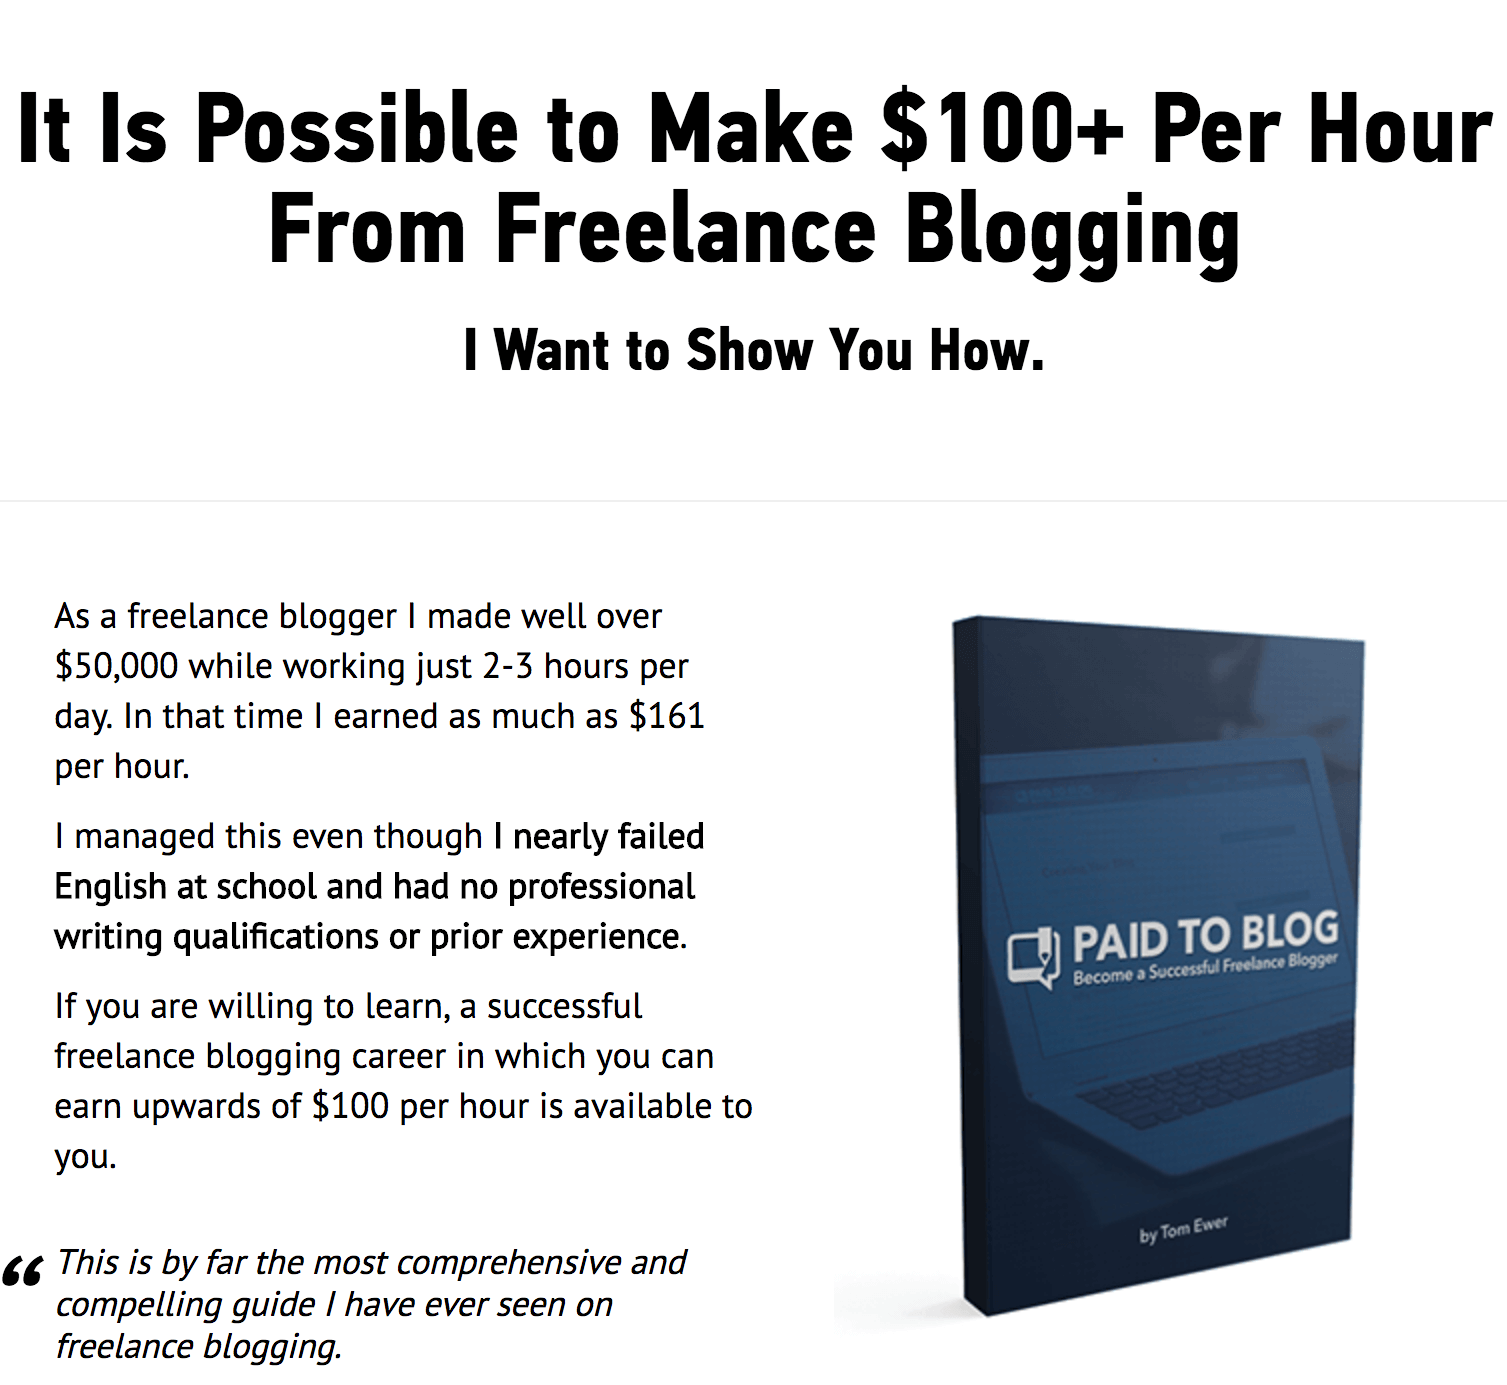 The Paid to Blog home page.